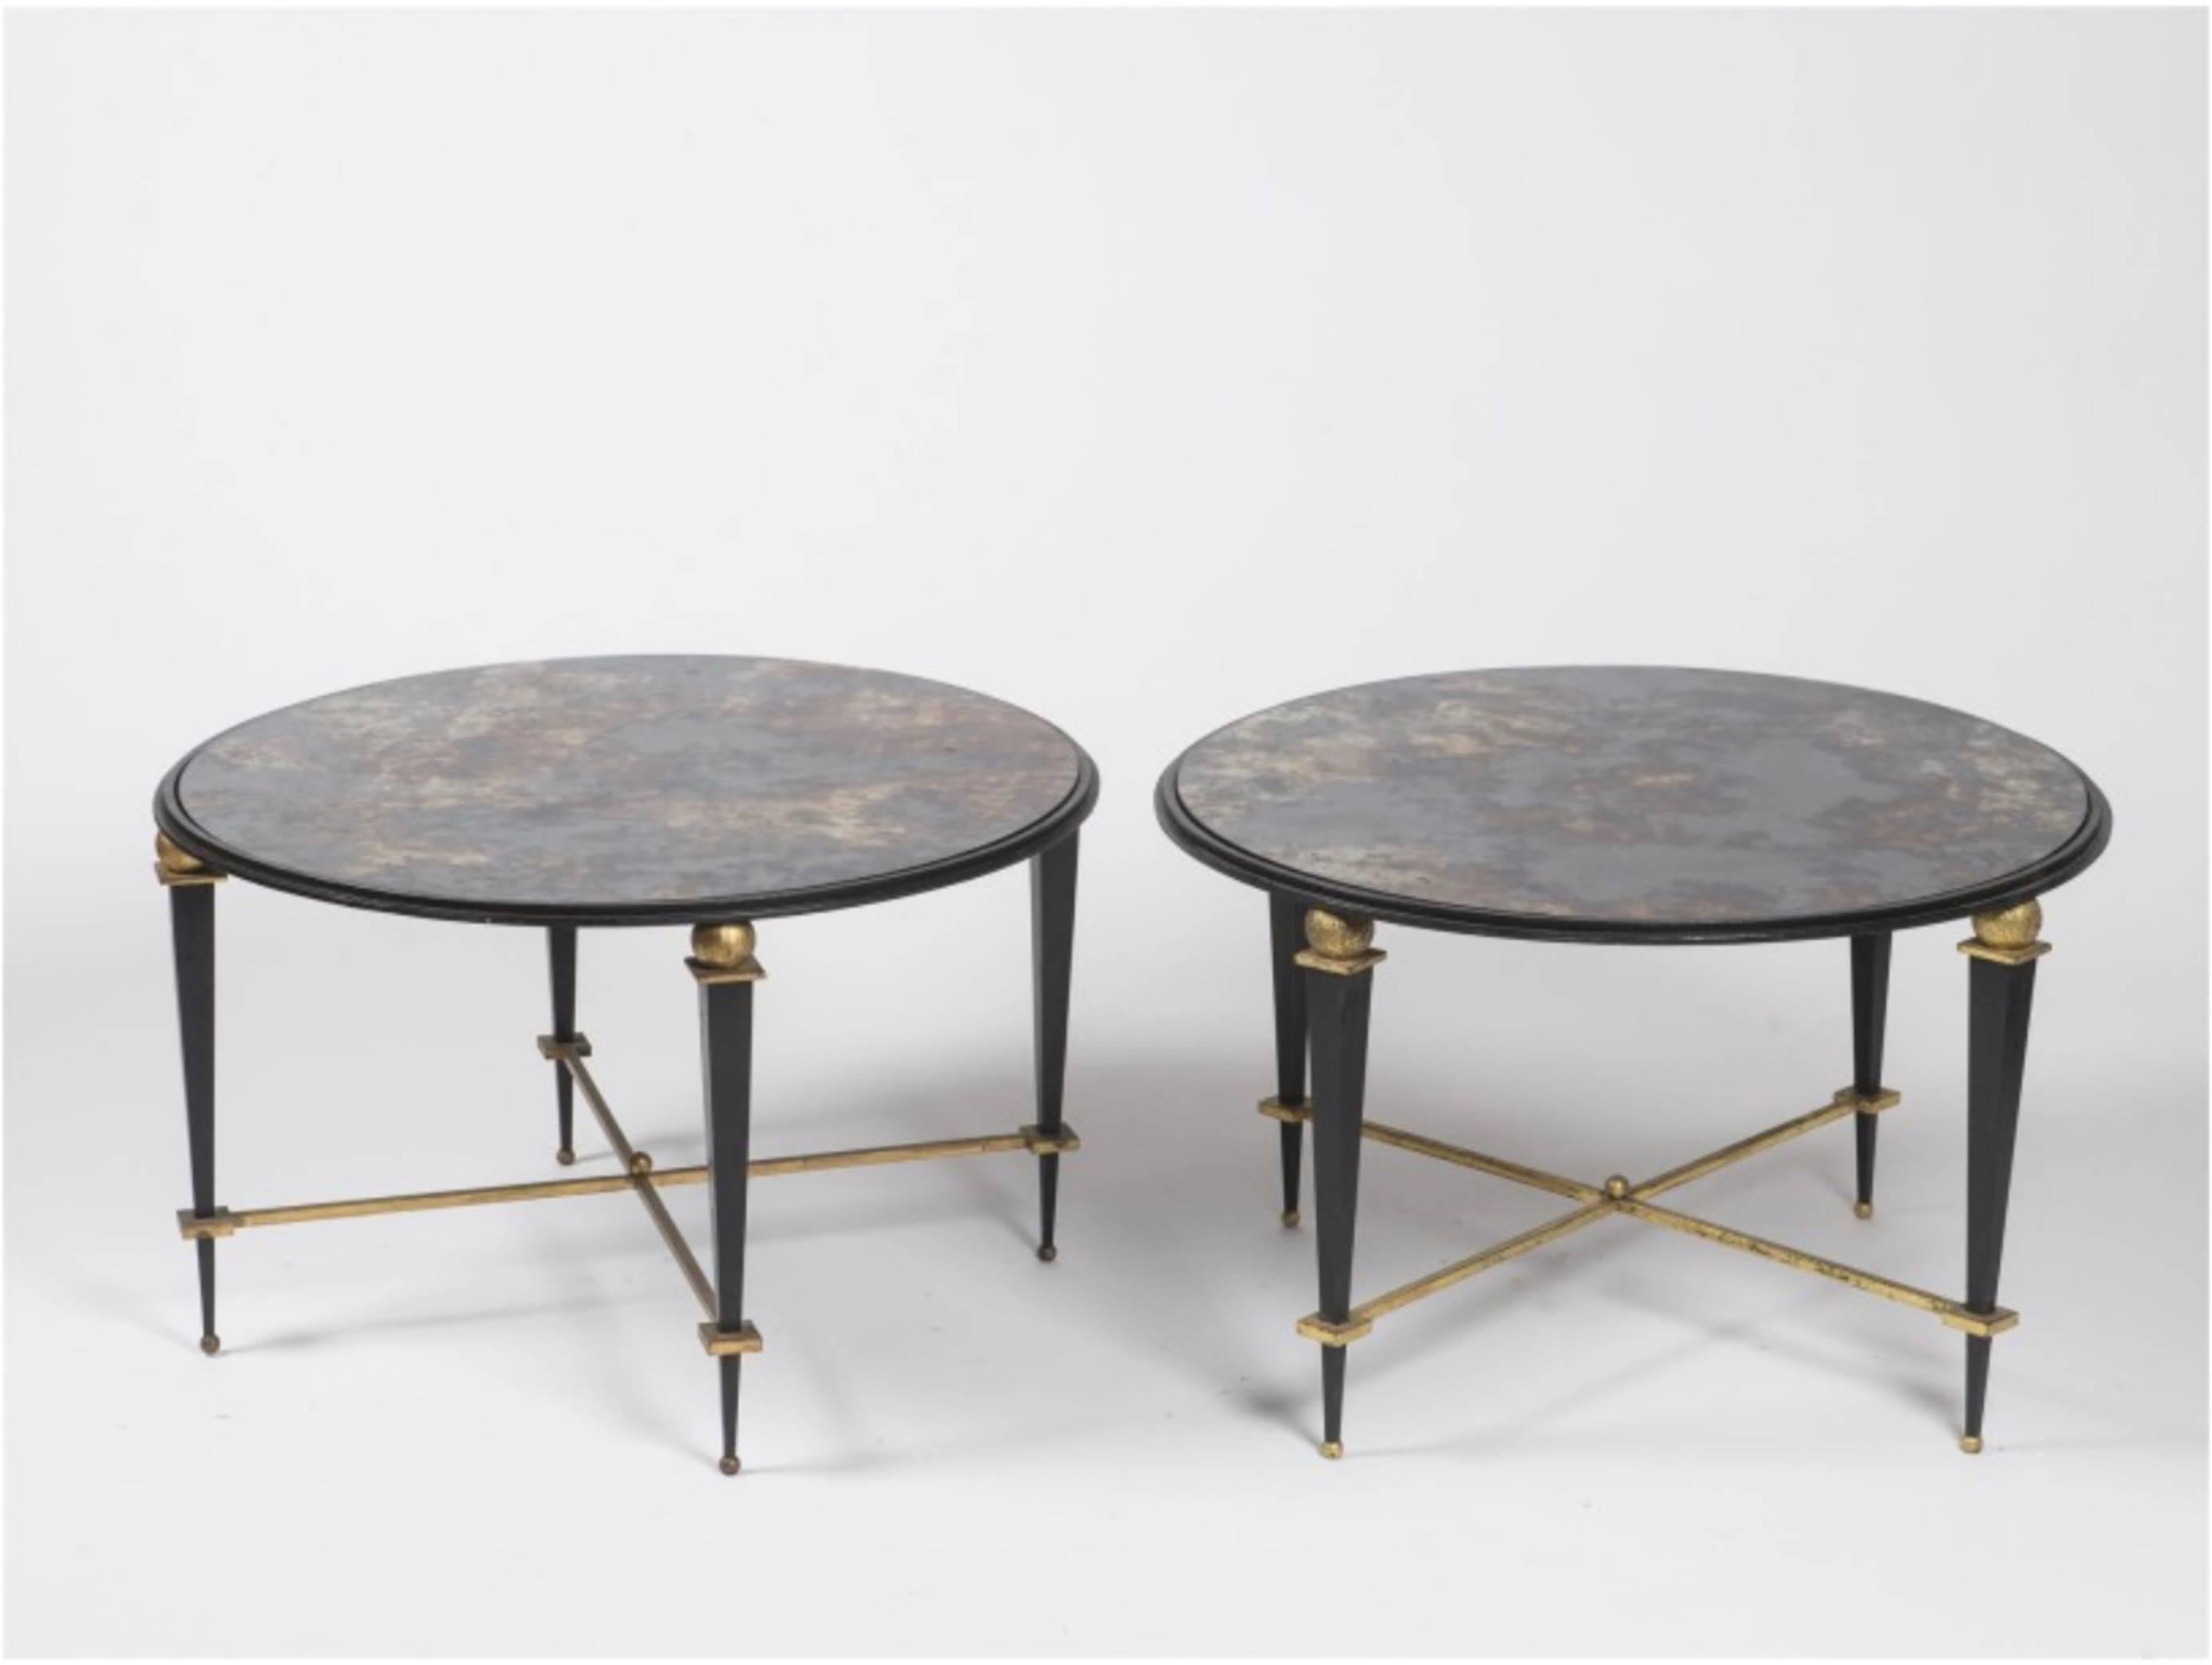 Pedestal table by Jules Leleu, circa 1940.
Wrought iron frame, partly gold leaf gilding, circular top called Turquin, in speckled red glass. Tripod legs united by an "X" spacer, decorated with a ball in its central part.